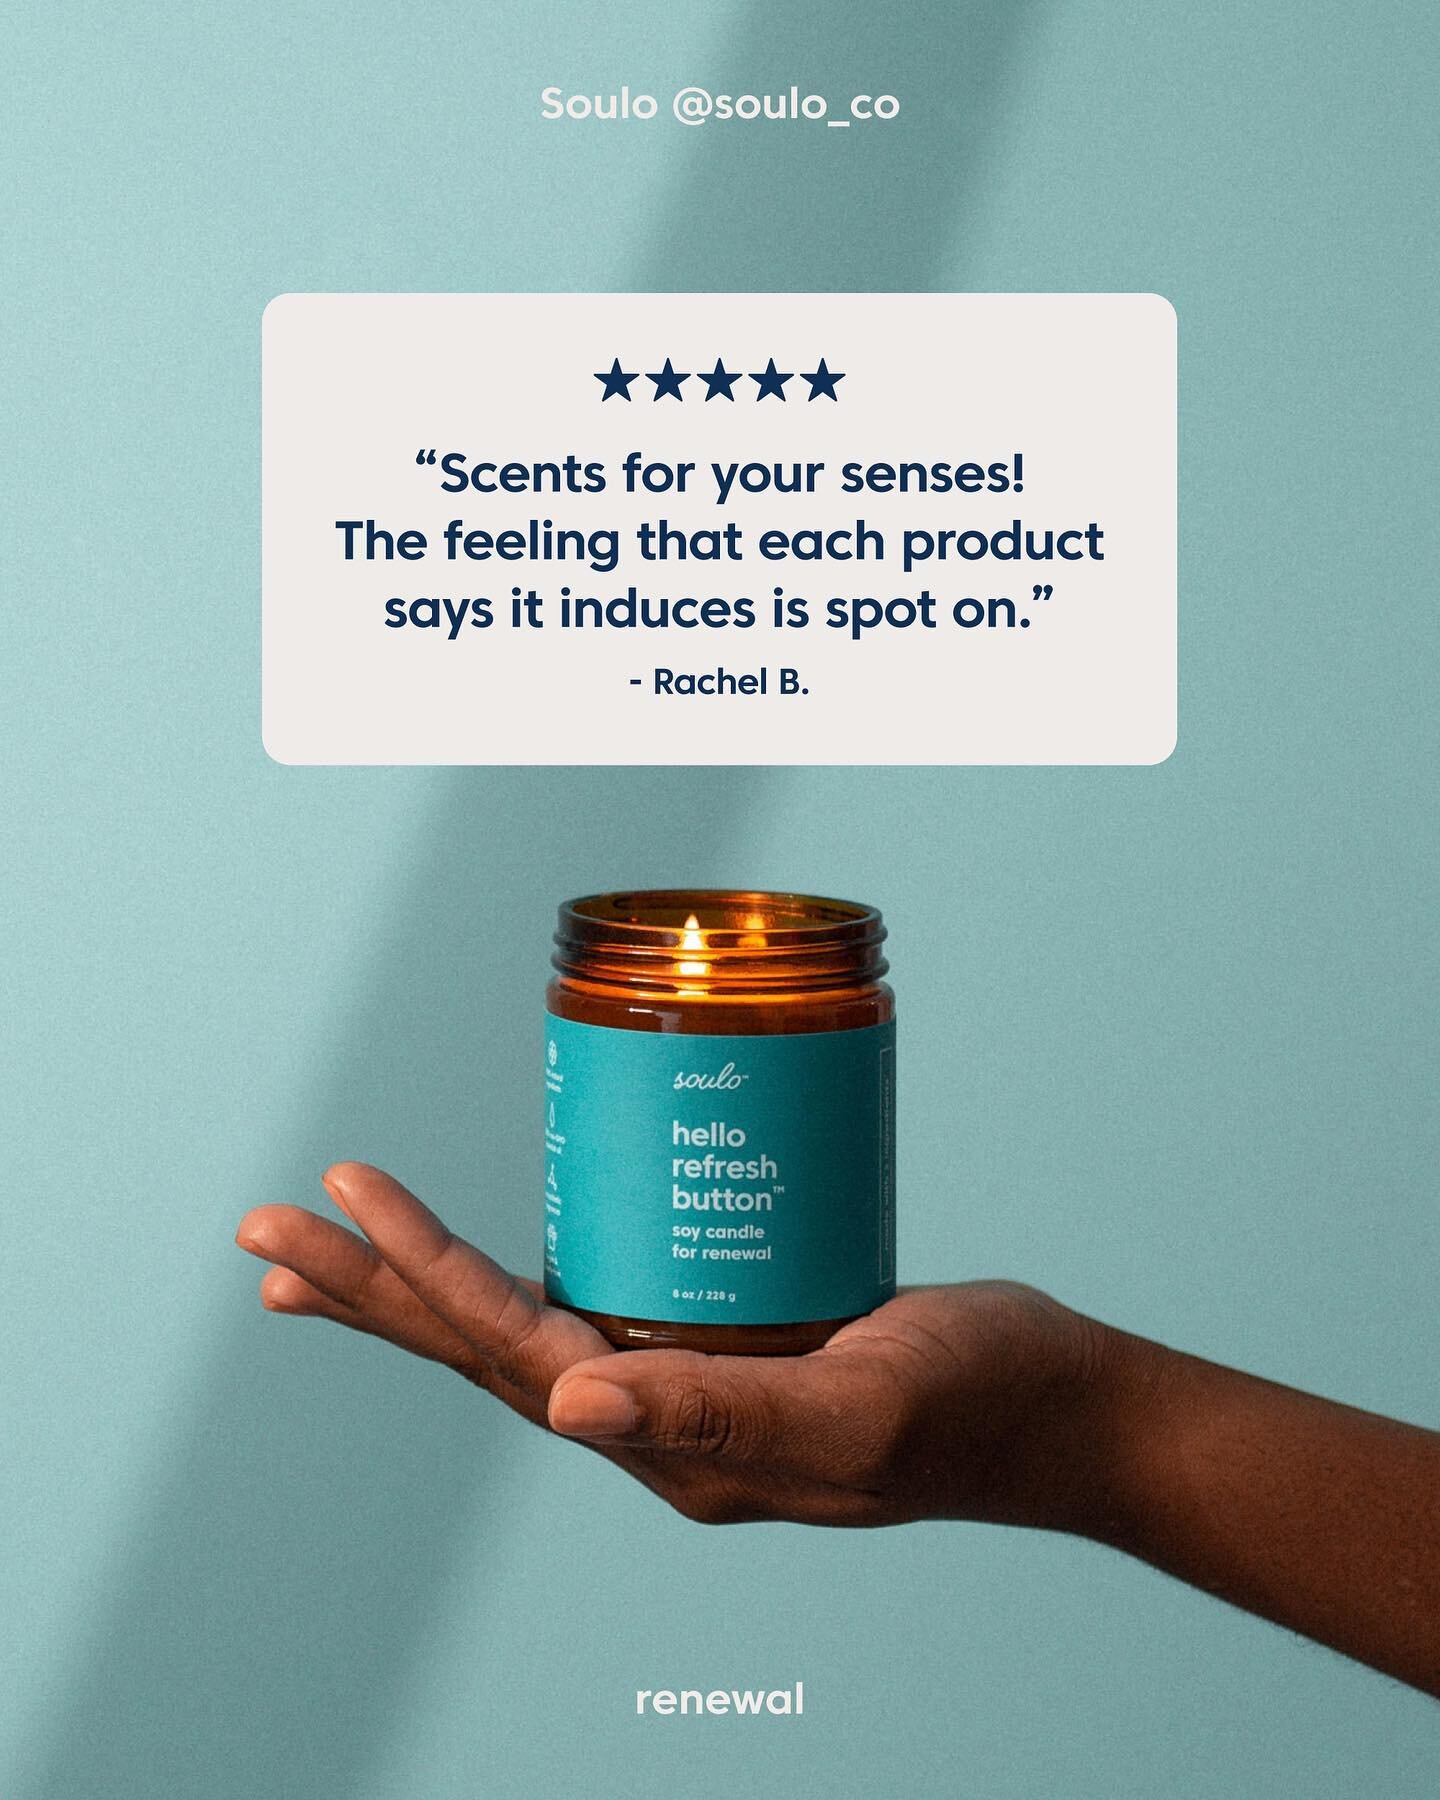 &ldquo;Scents for your senses!&rdquo; Okay we love youuu. ❤️ Our candles are made with natural essential oils to help induce specific feelings&mdash;like the feeling of hitting a refresh button. 🔄

#candle #natural #essentialoil #mentalhealth #feeli